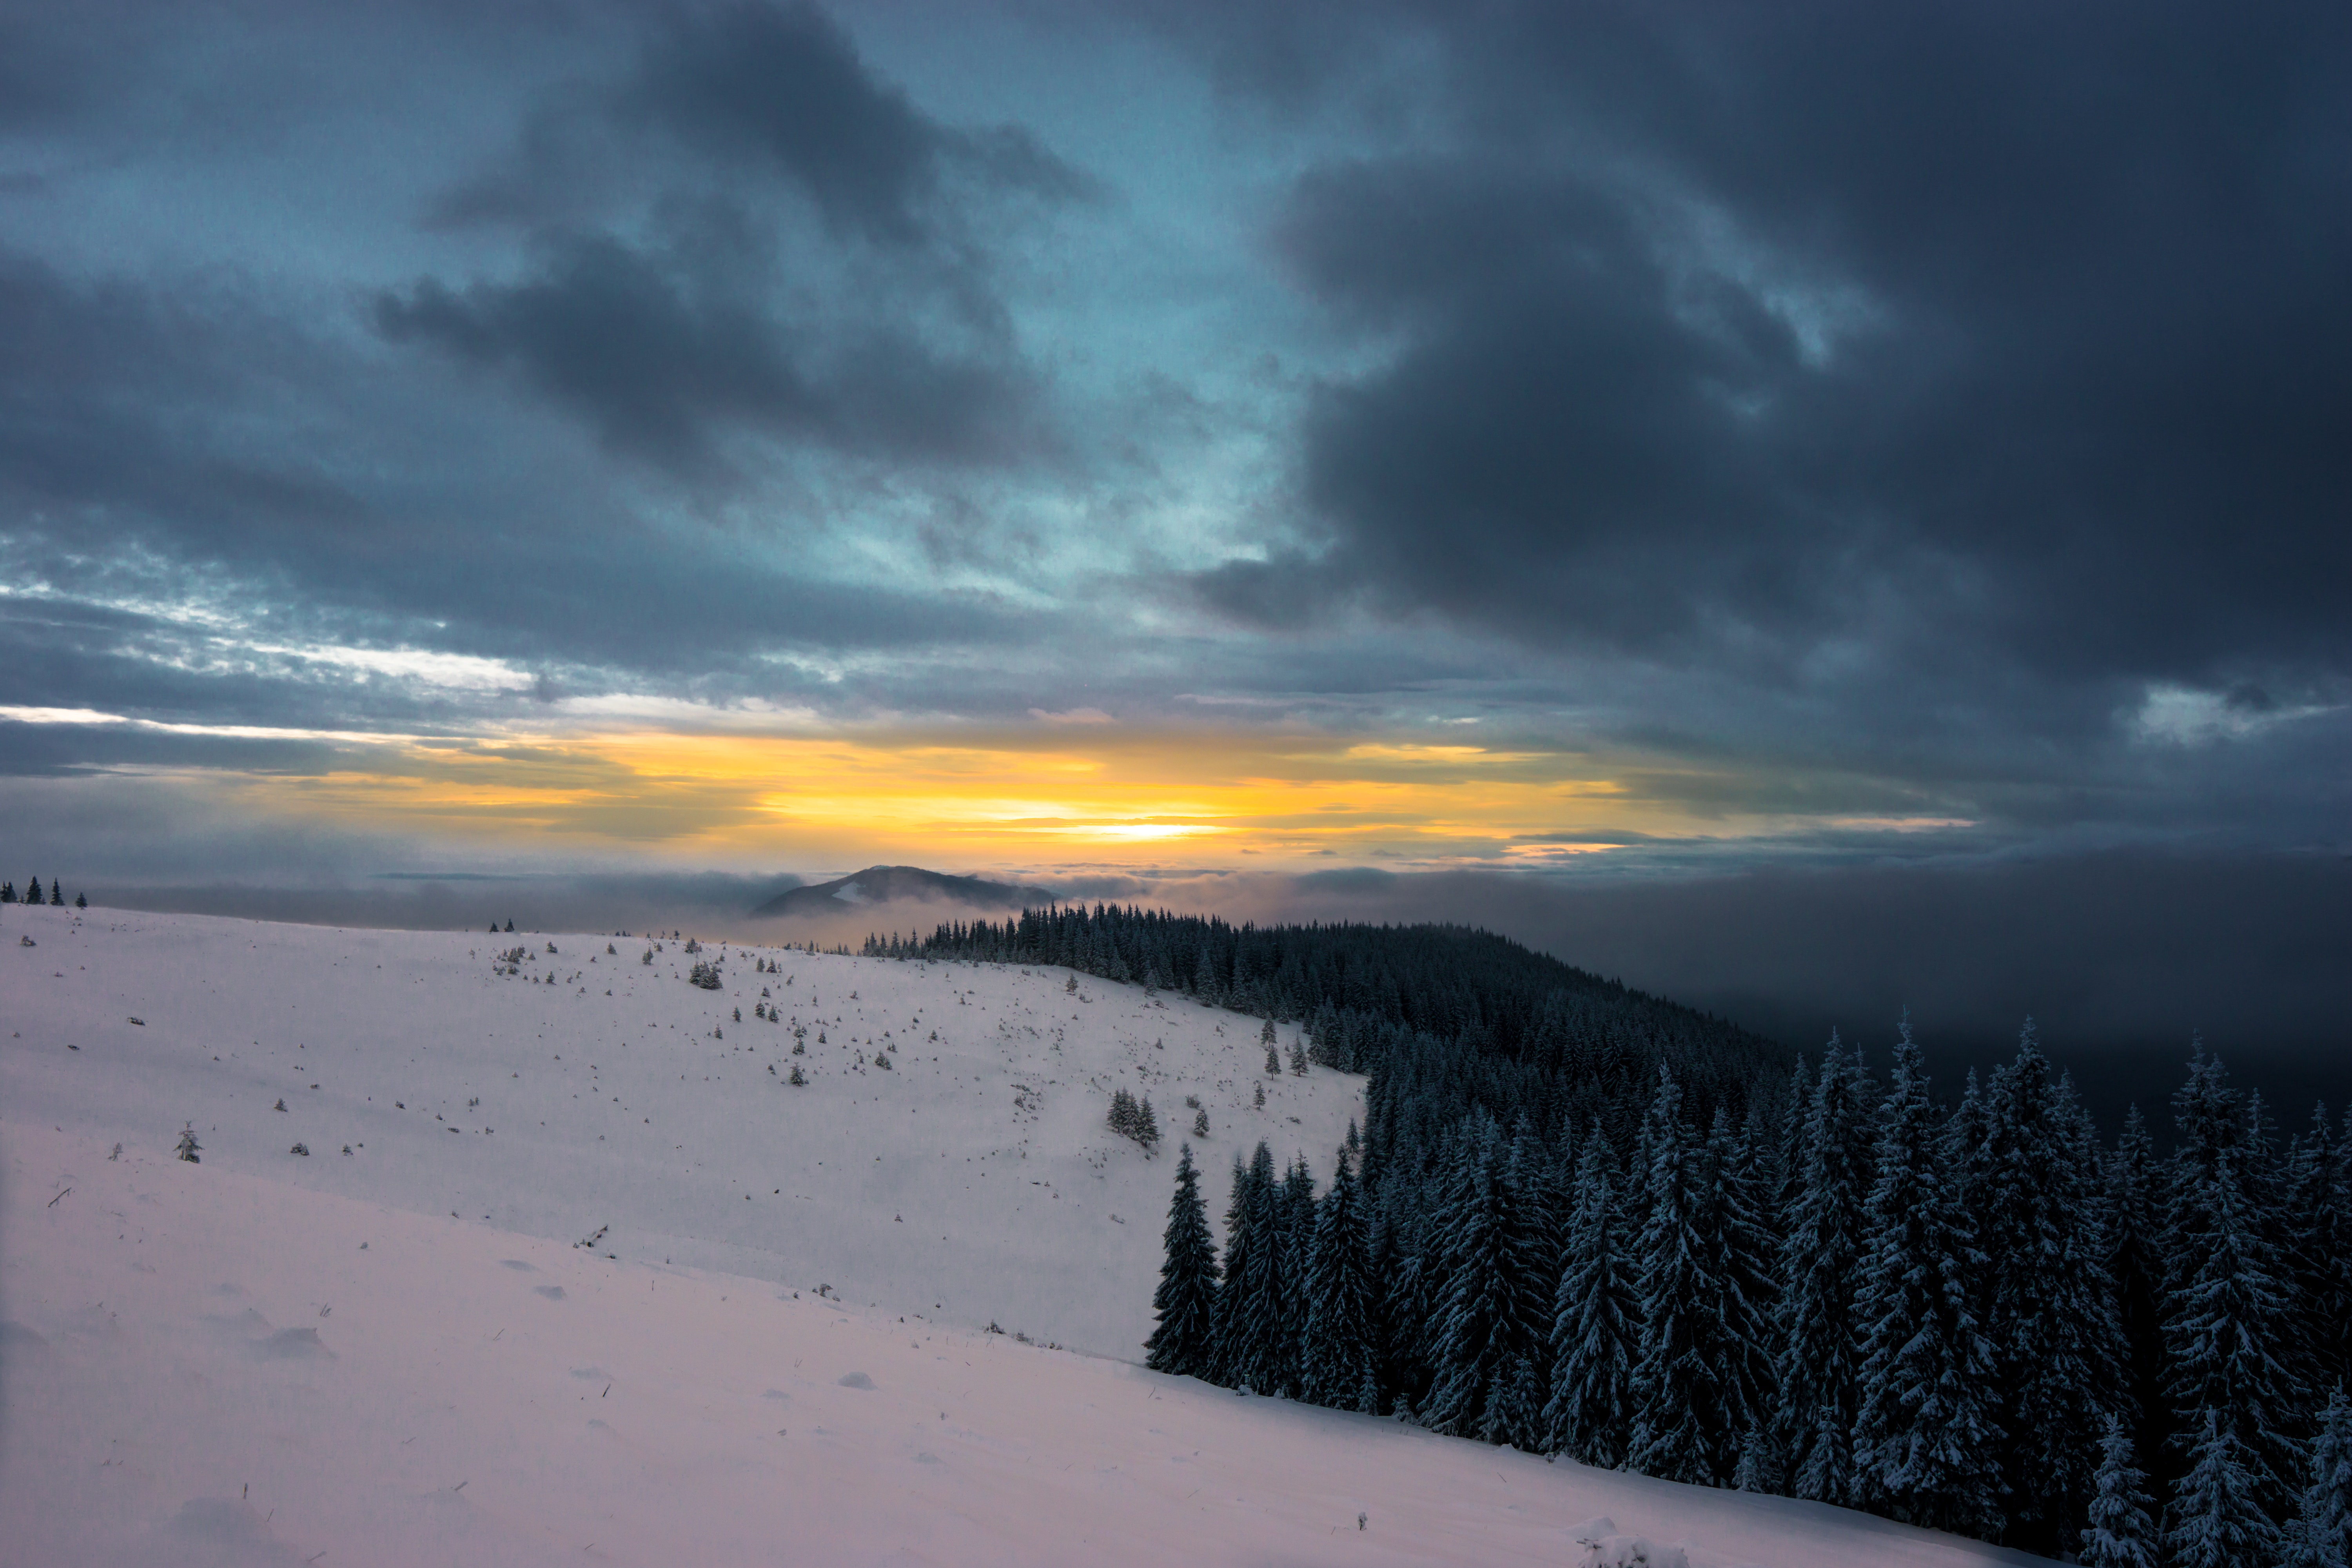 mountains, snow, nature, winter, sunset, sky, clouds, forest, snow covered, snowbound